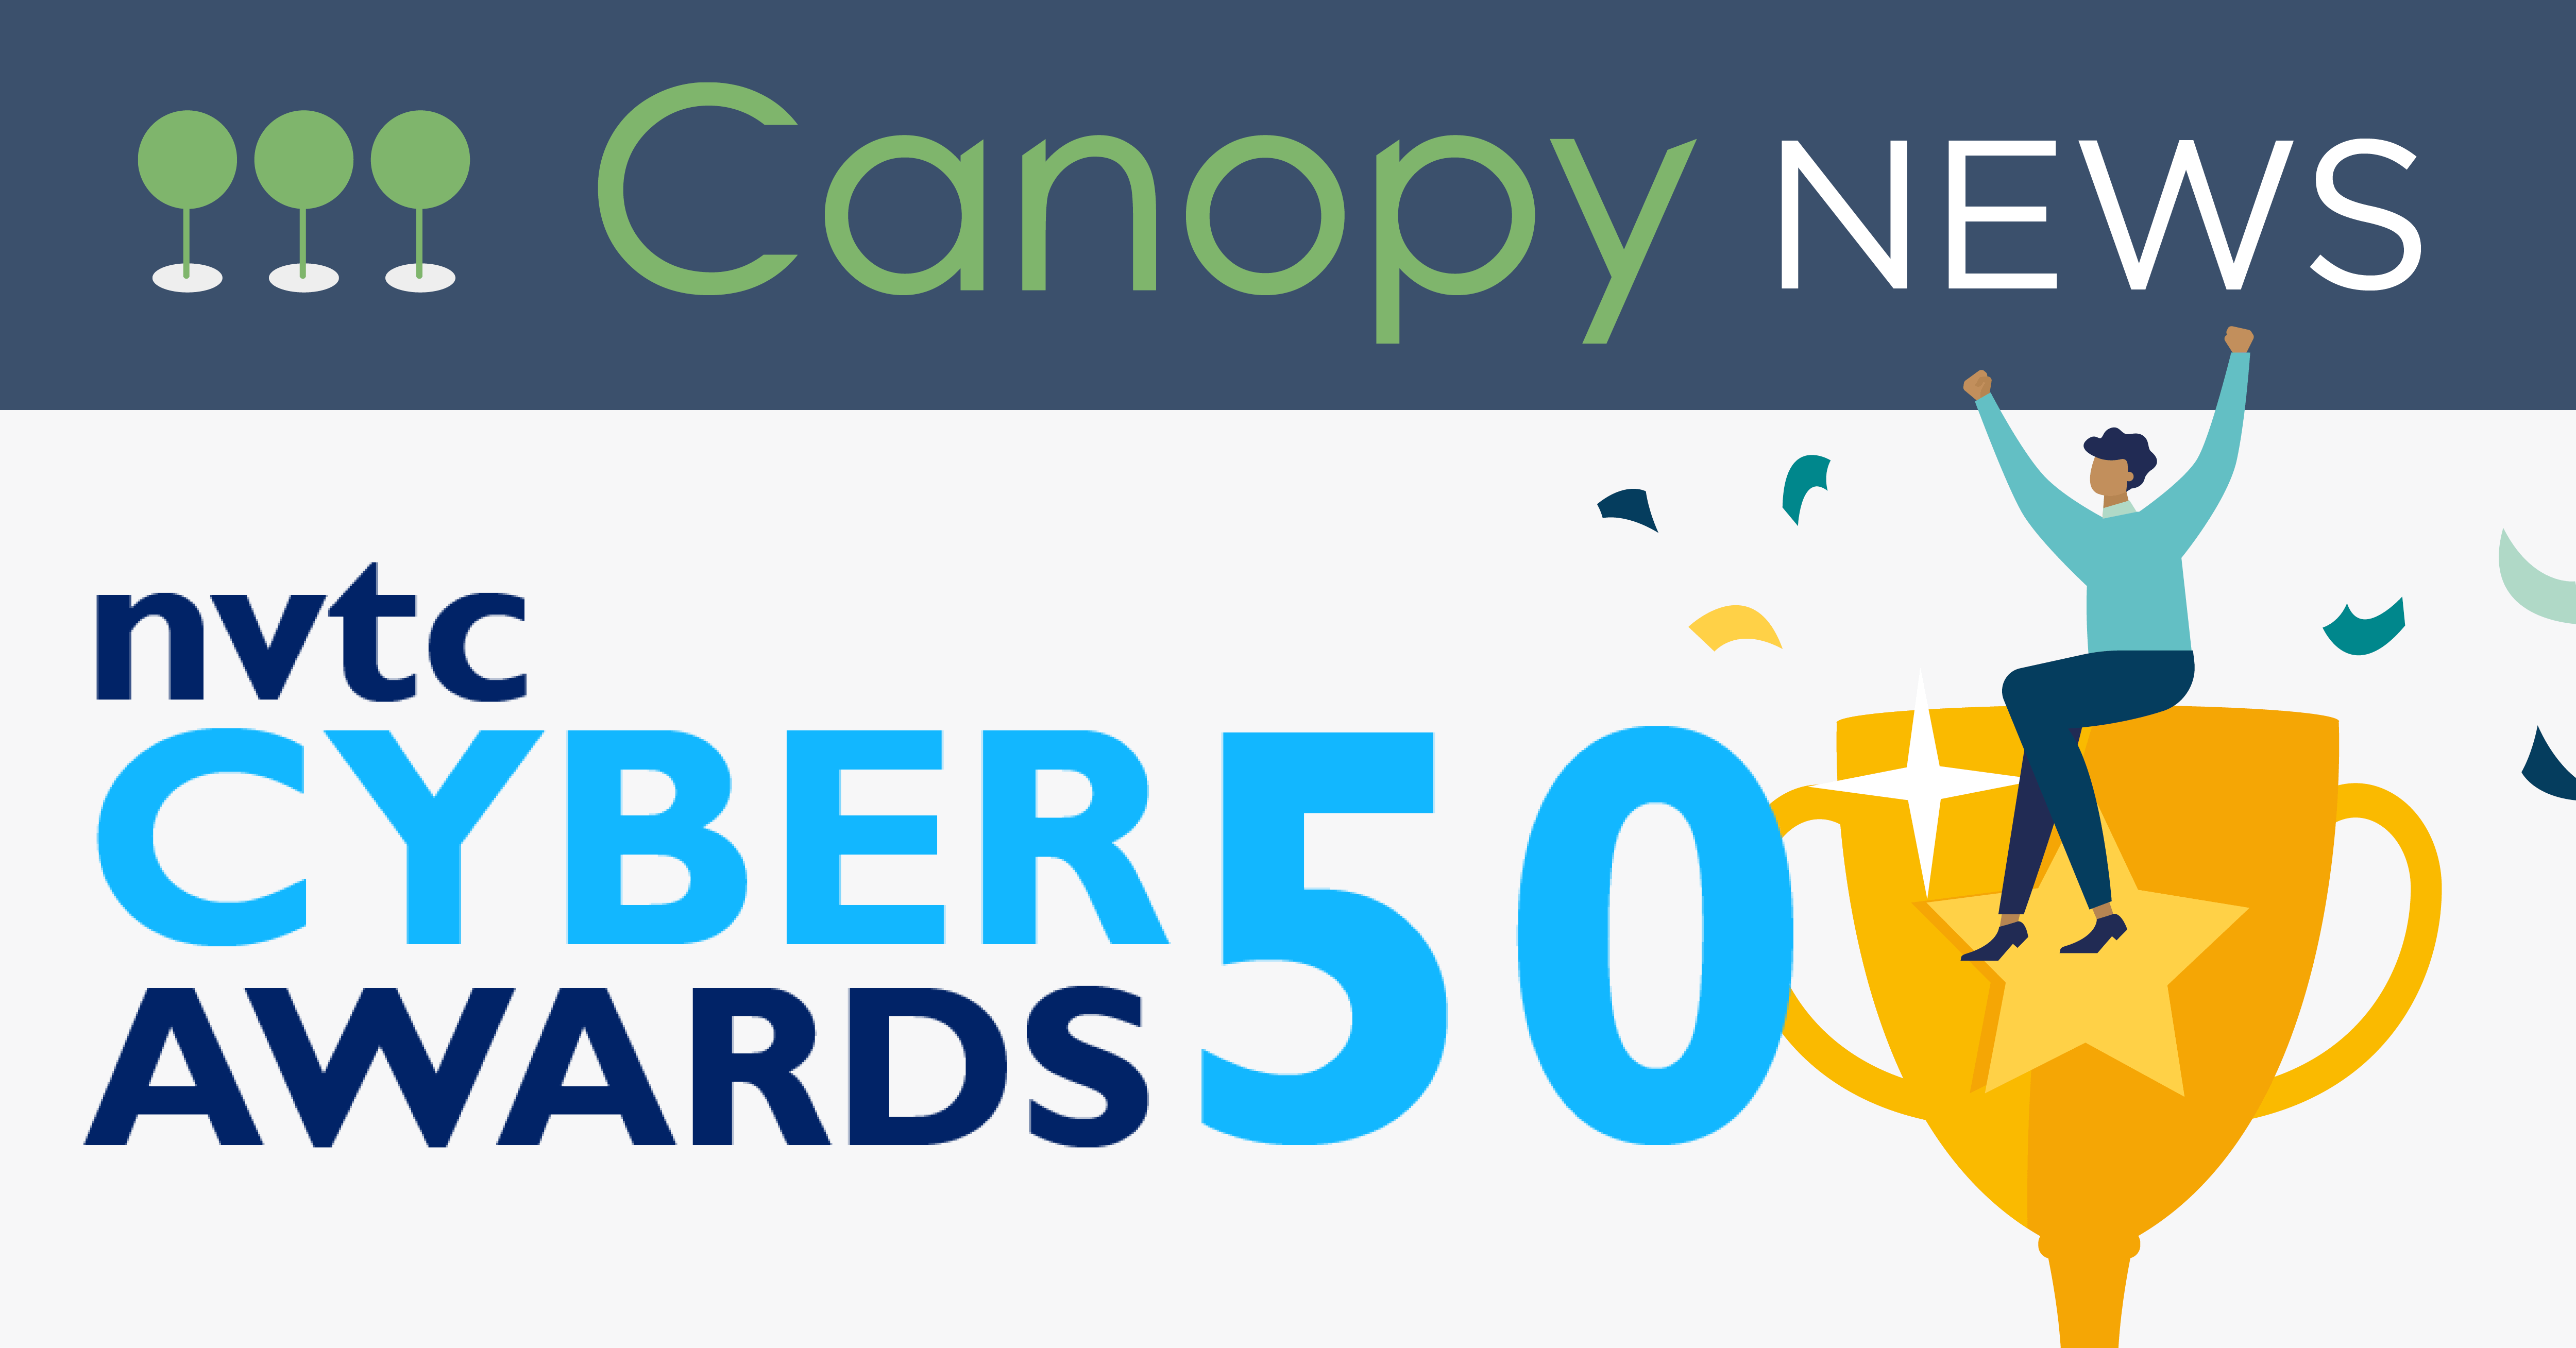 Canopy logo with NVTC Cyber50 Awards logo and vector man with trophy